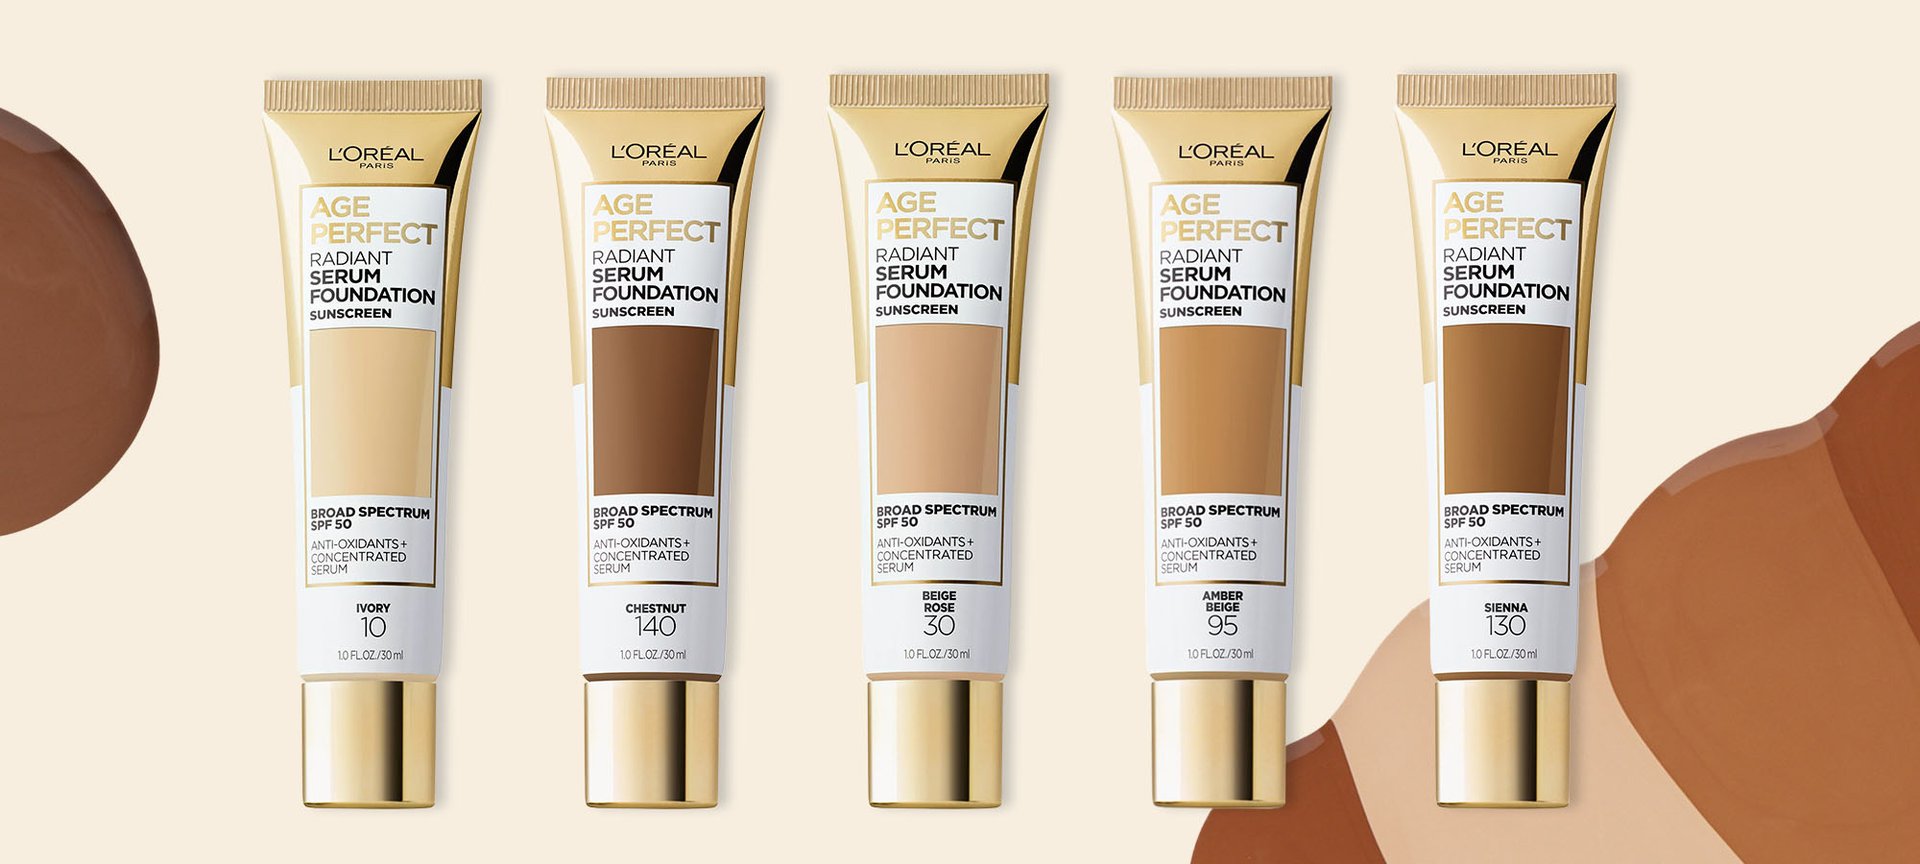 How to Find the Best Foundation Color Shade for You: 10 Steps